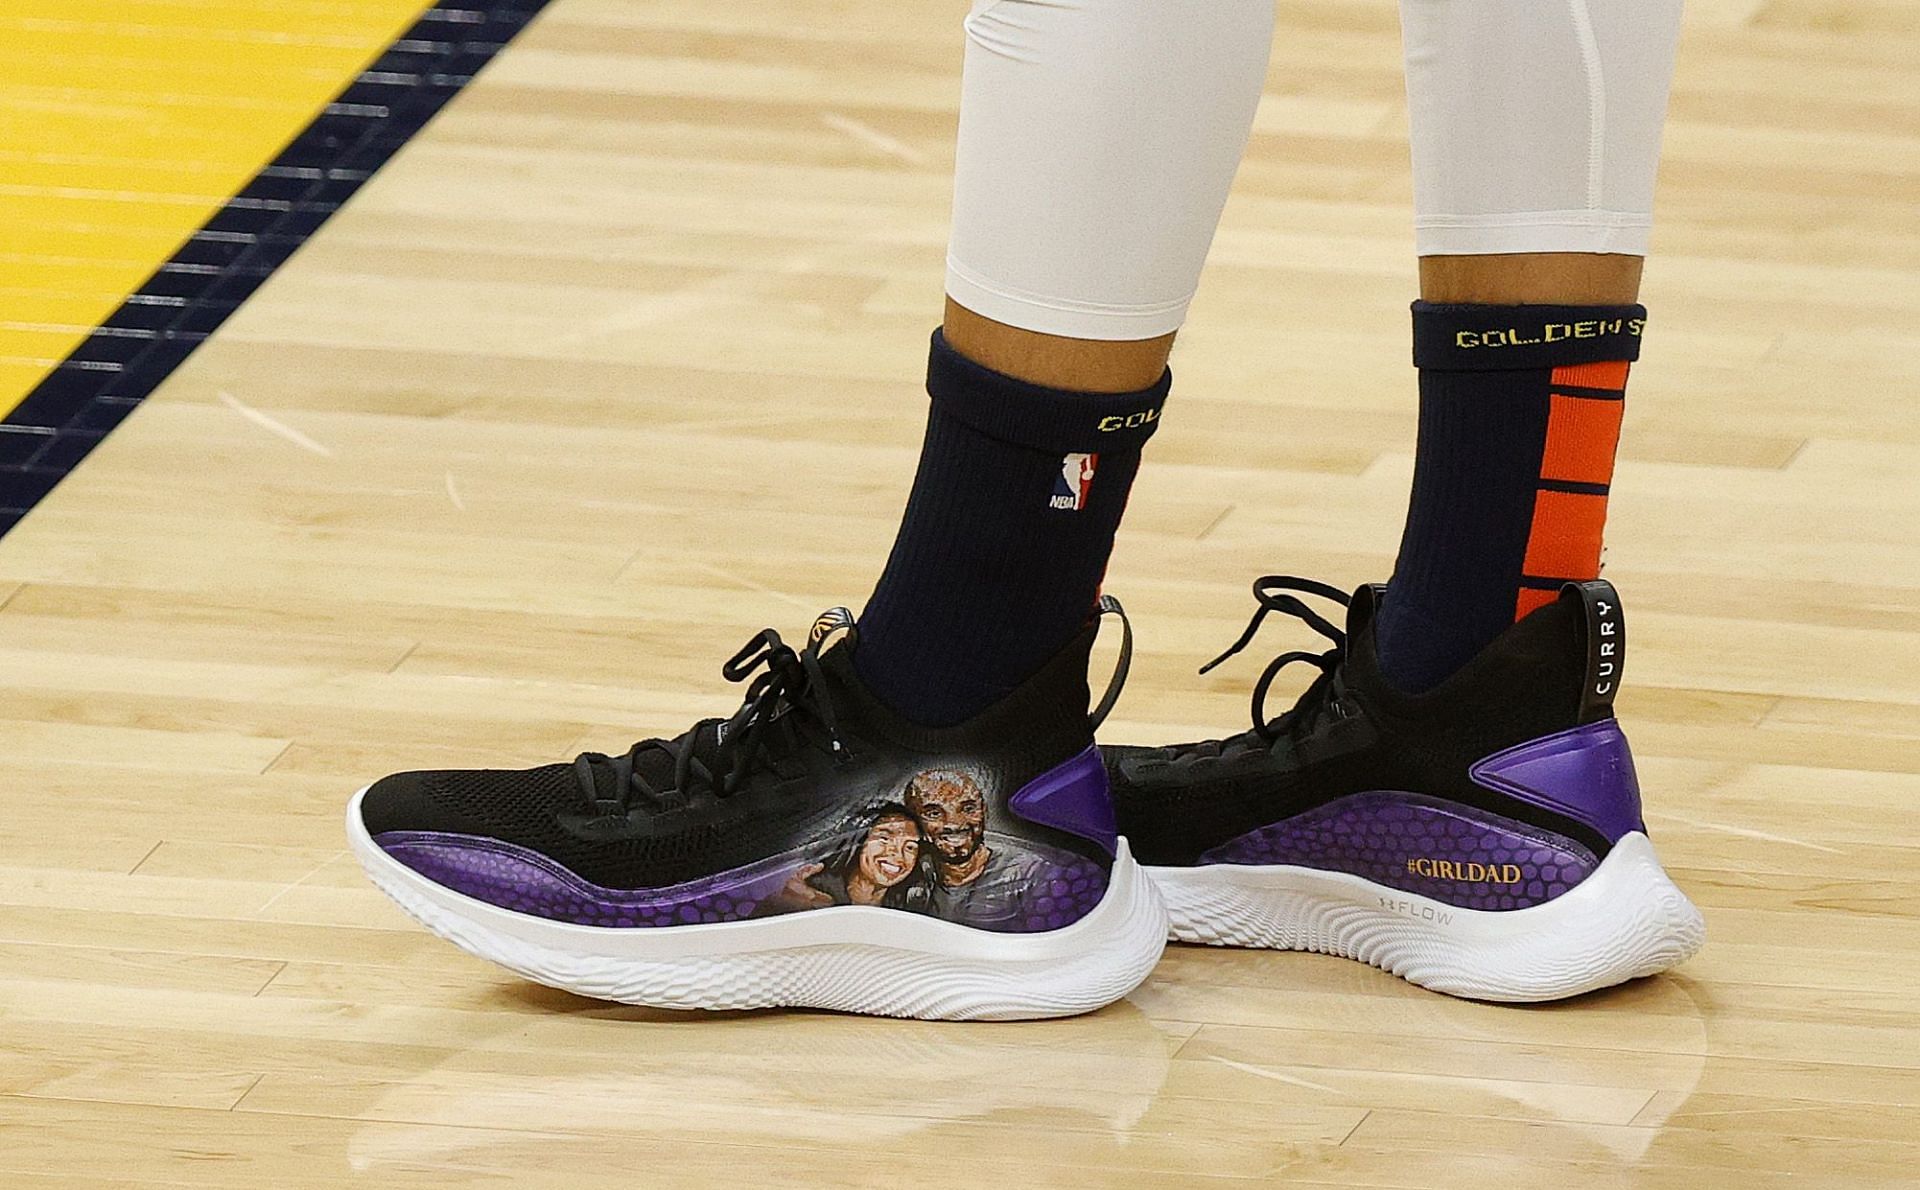 Steph Curry wearing custom Curry 8s as tribute to Kobe and Gigi Bryant